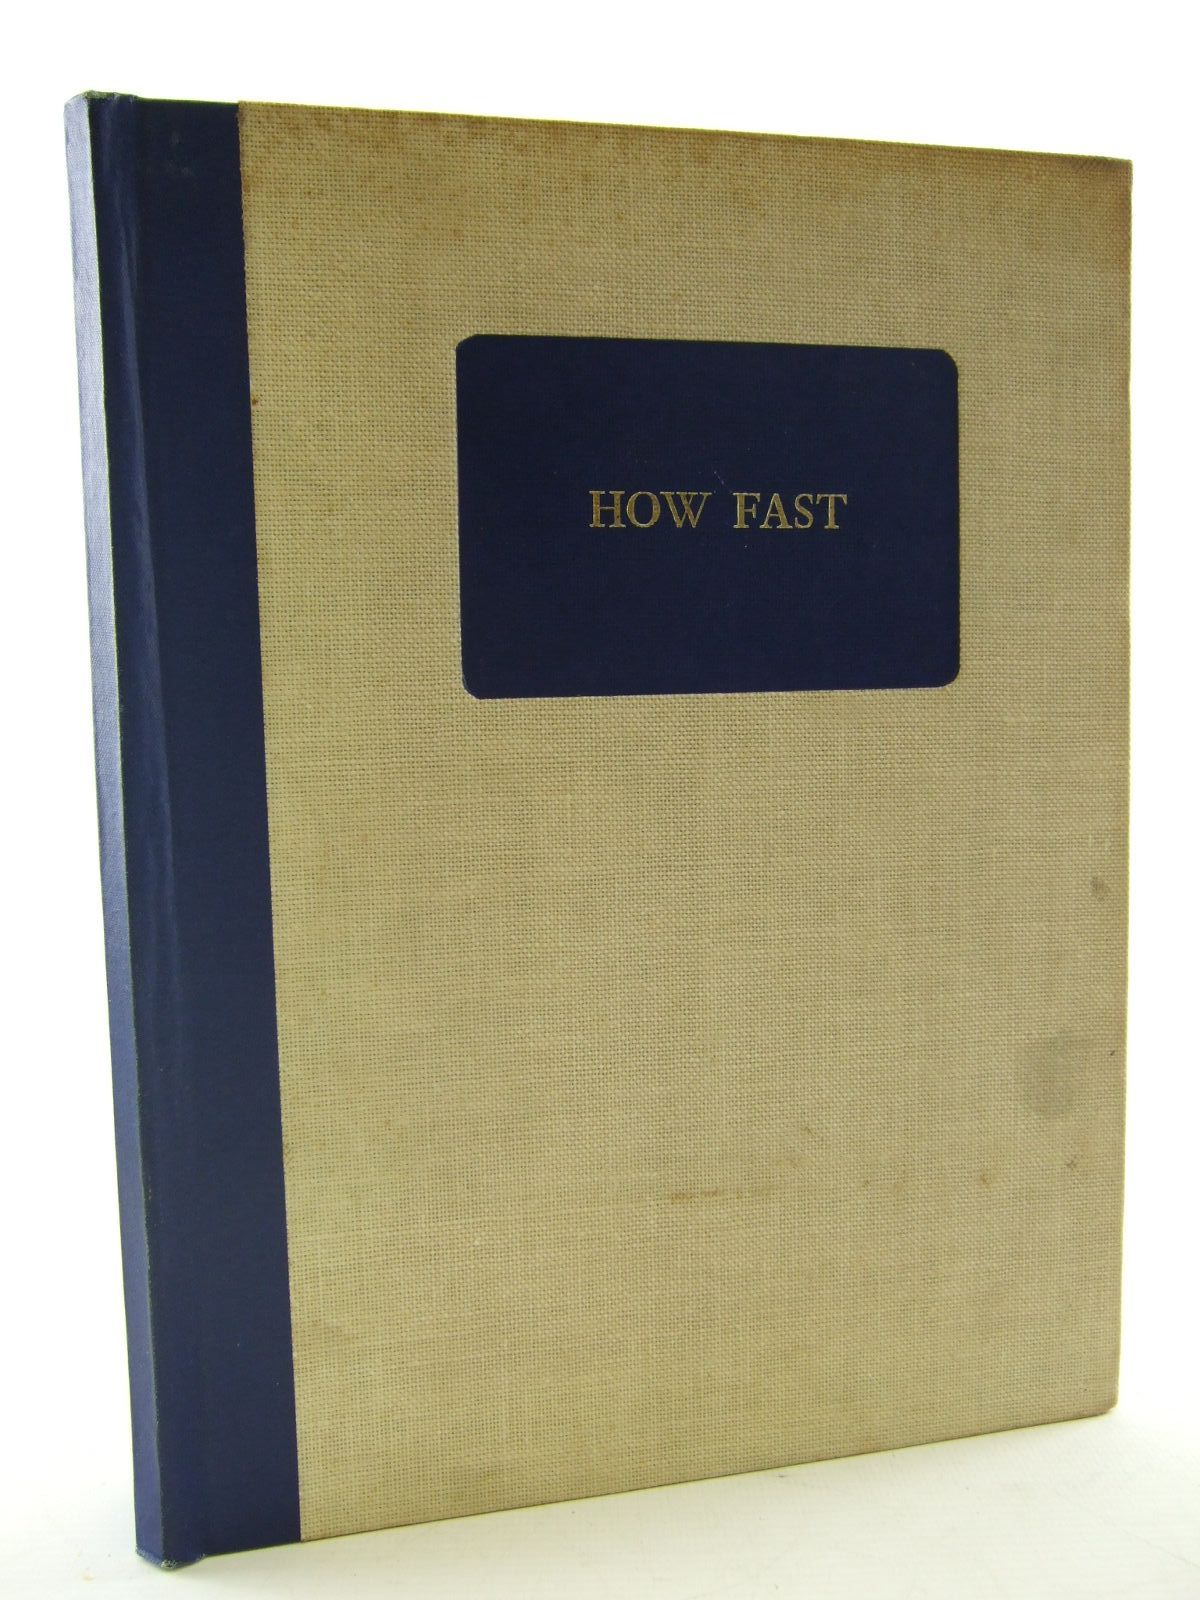 Photo of HOW FAST AN ALLIANCE illustrated by Pinyon, W.H. published by Smiths Industrial Instruments Ltd. (STOCK CODE: 1706733)  for sale by Stella & Rose's Books